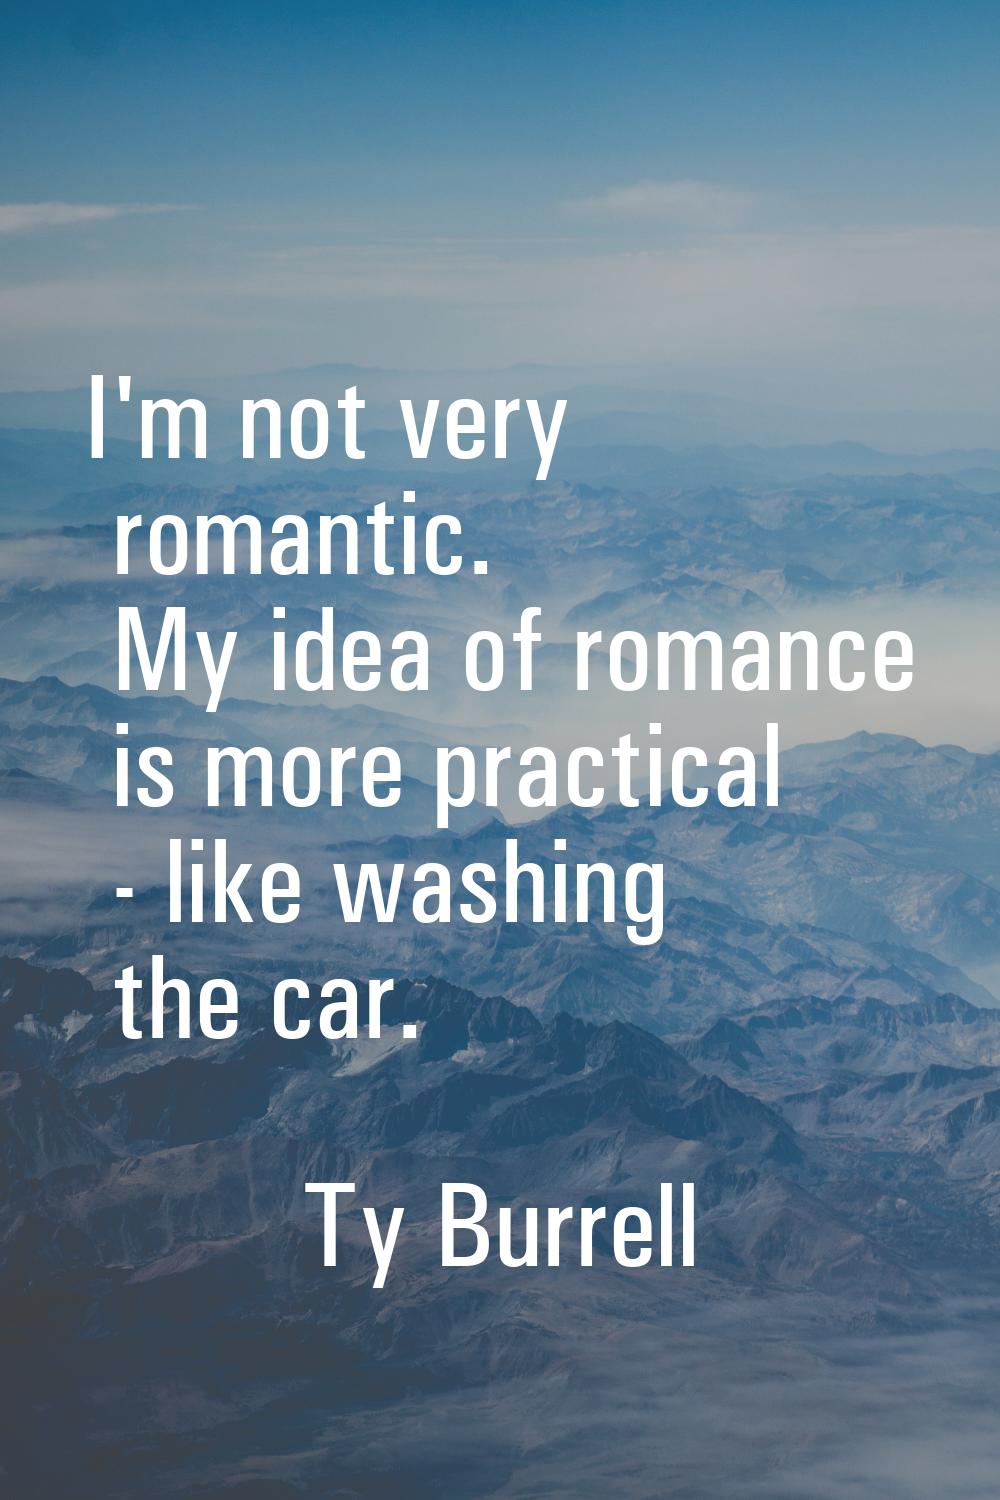 I'm not very romantic. My idea of romance is more practical - like washing the car.